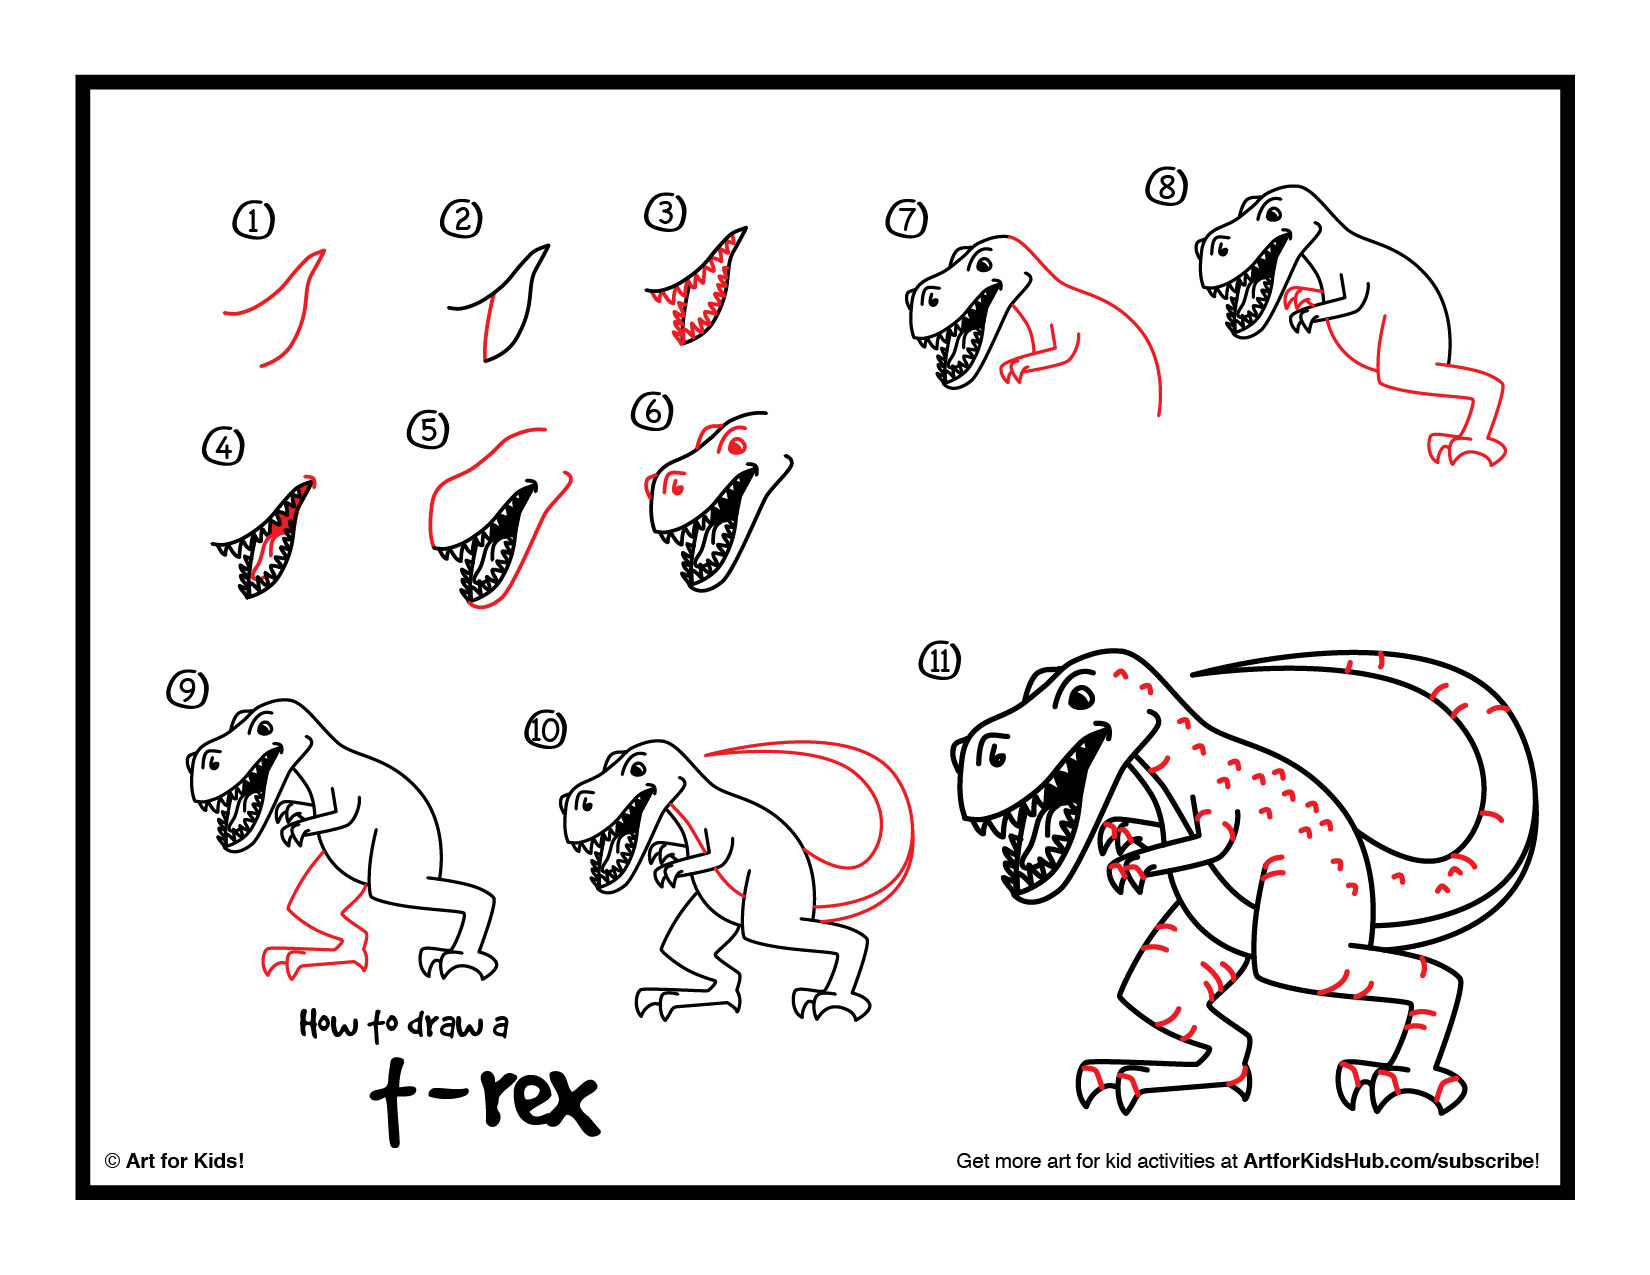 Top How To Draw A T rex Step By Step of all time Learn more here 